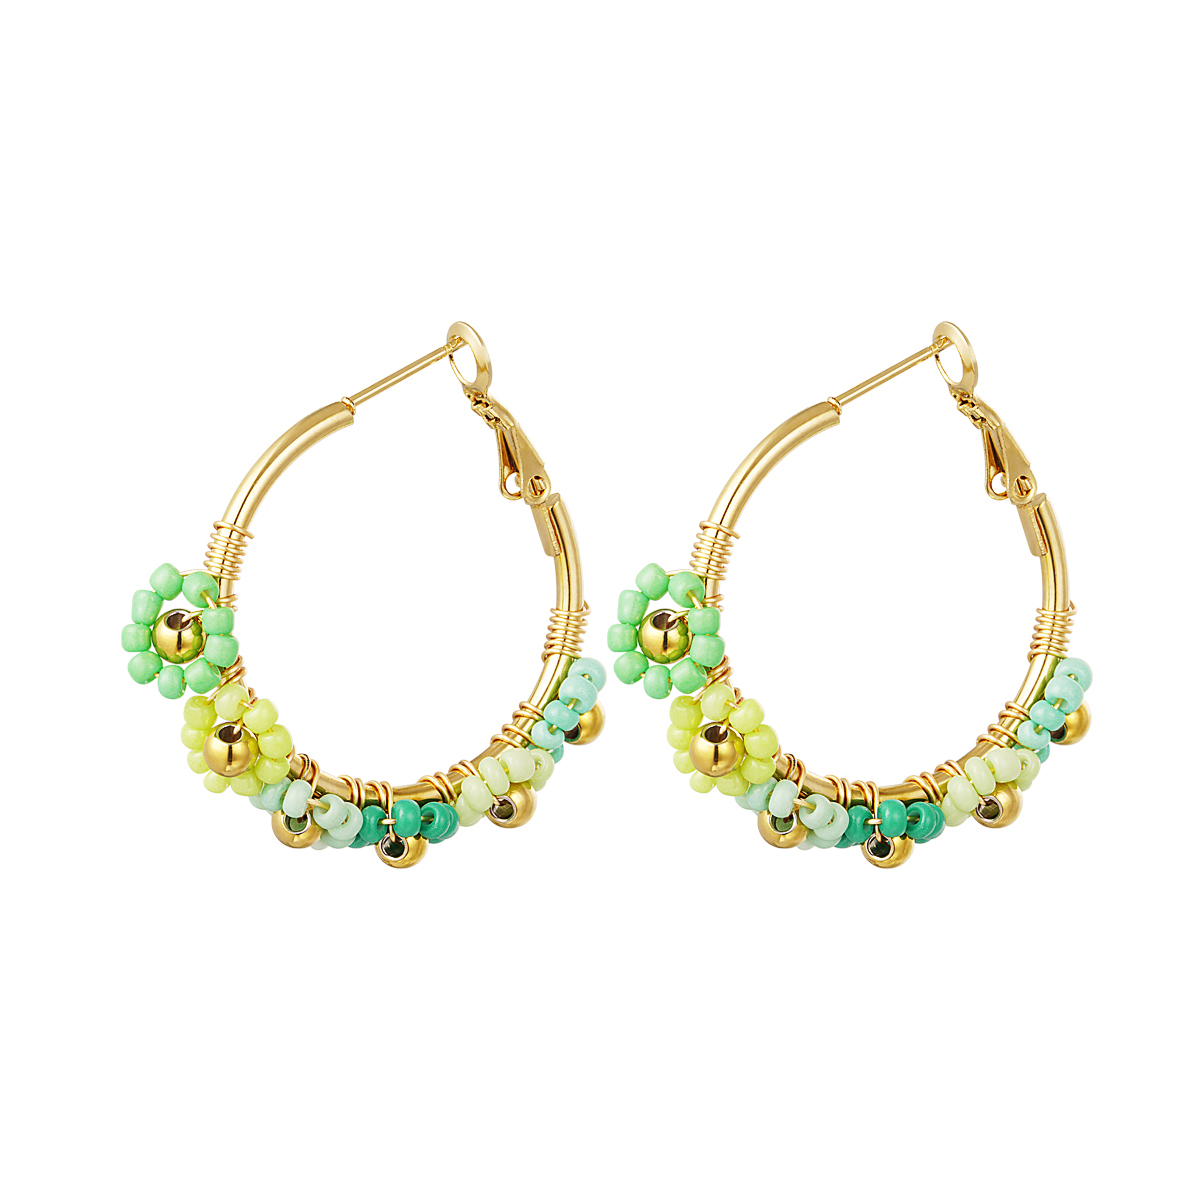 Earrings with colorful flowers